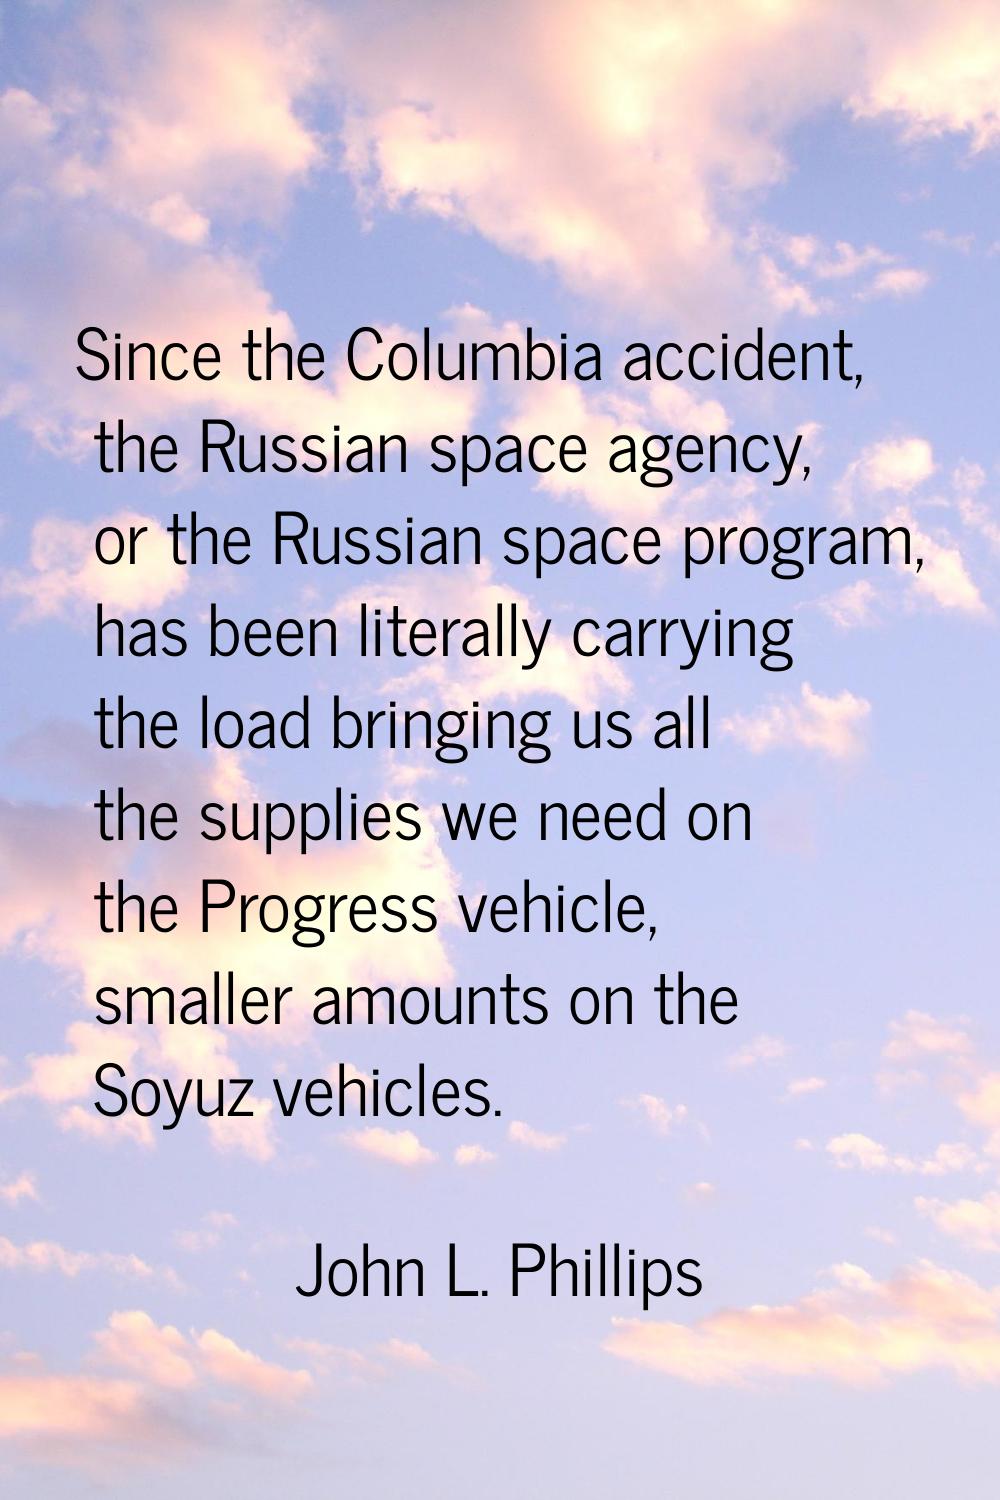 Since the Columbia accident, the Russian space agency, or the Russian space program, has been liter